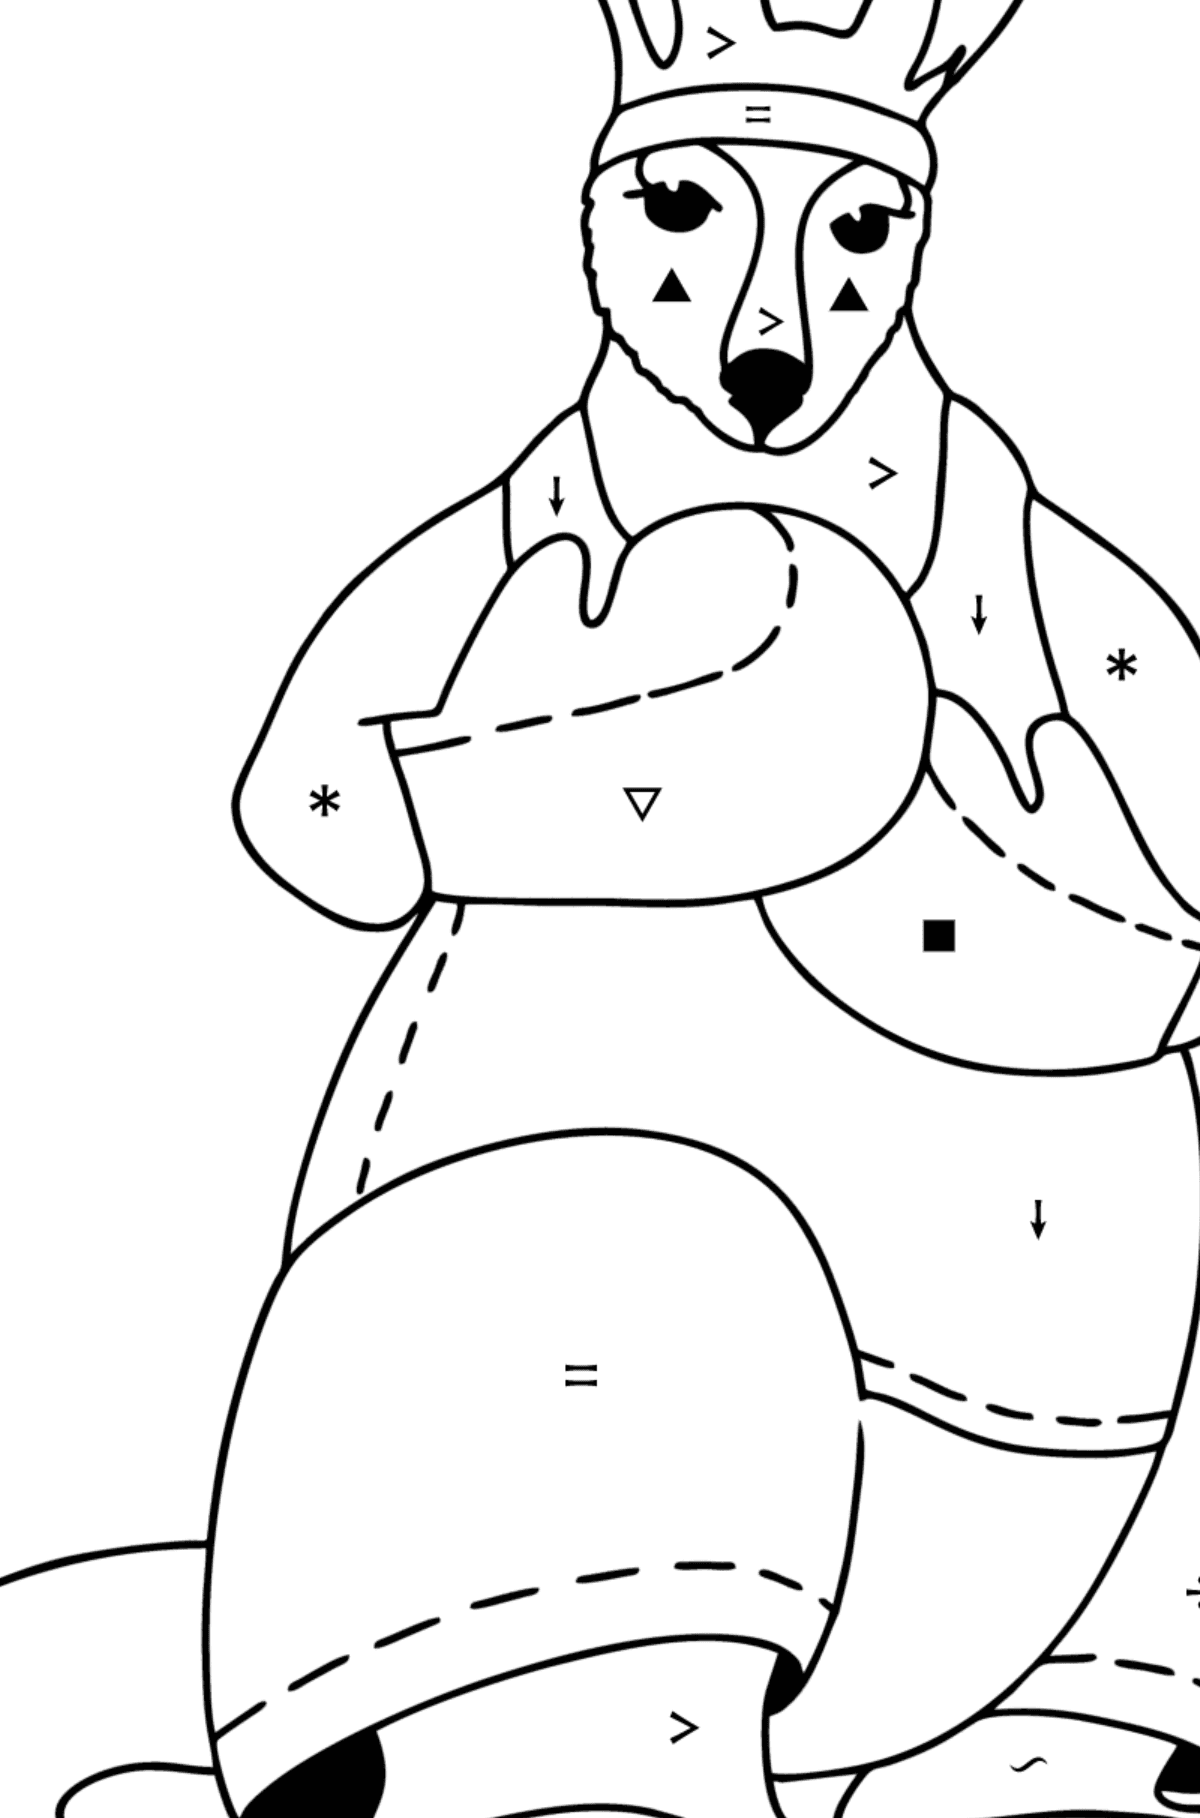 Kangaroo Boxer coloring page - Coloring by Symbols for Kids